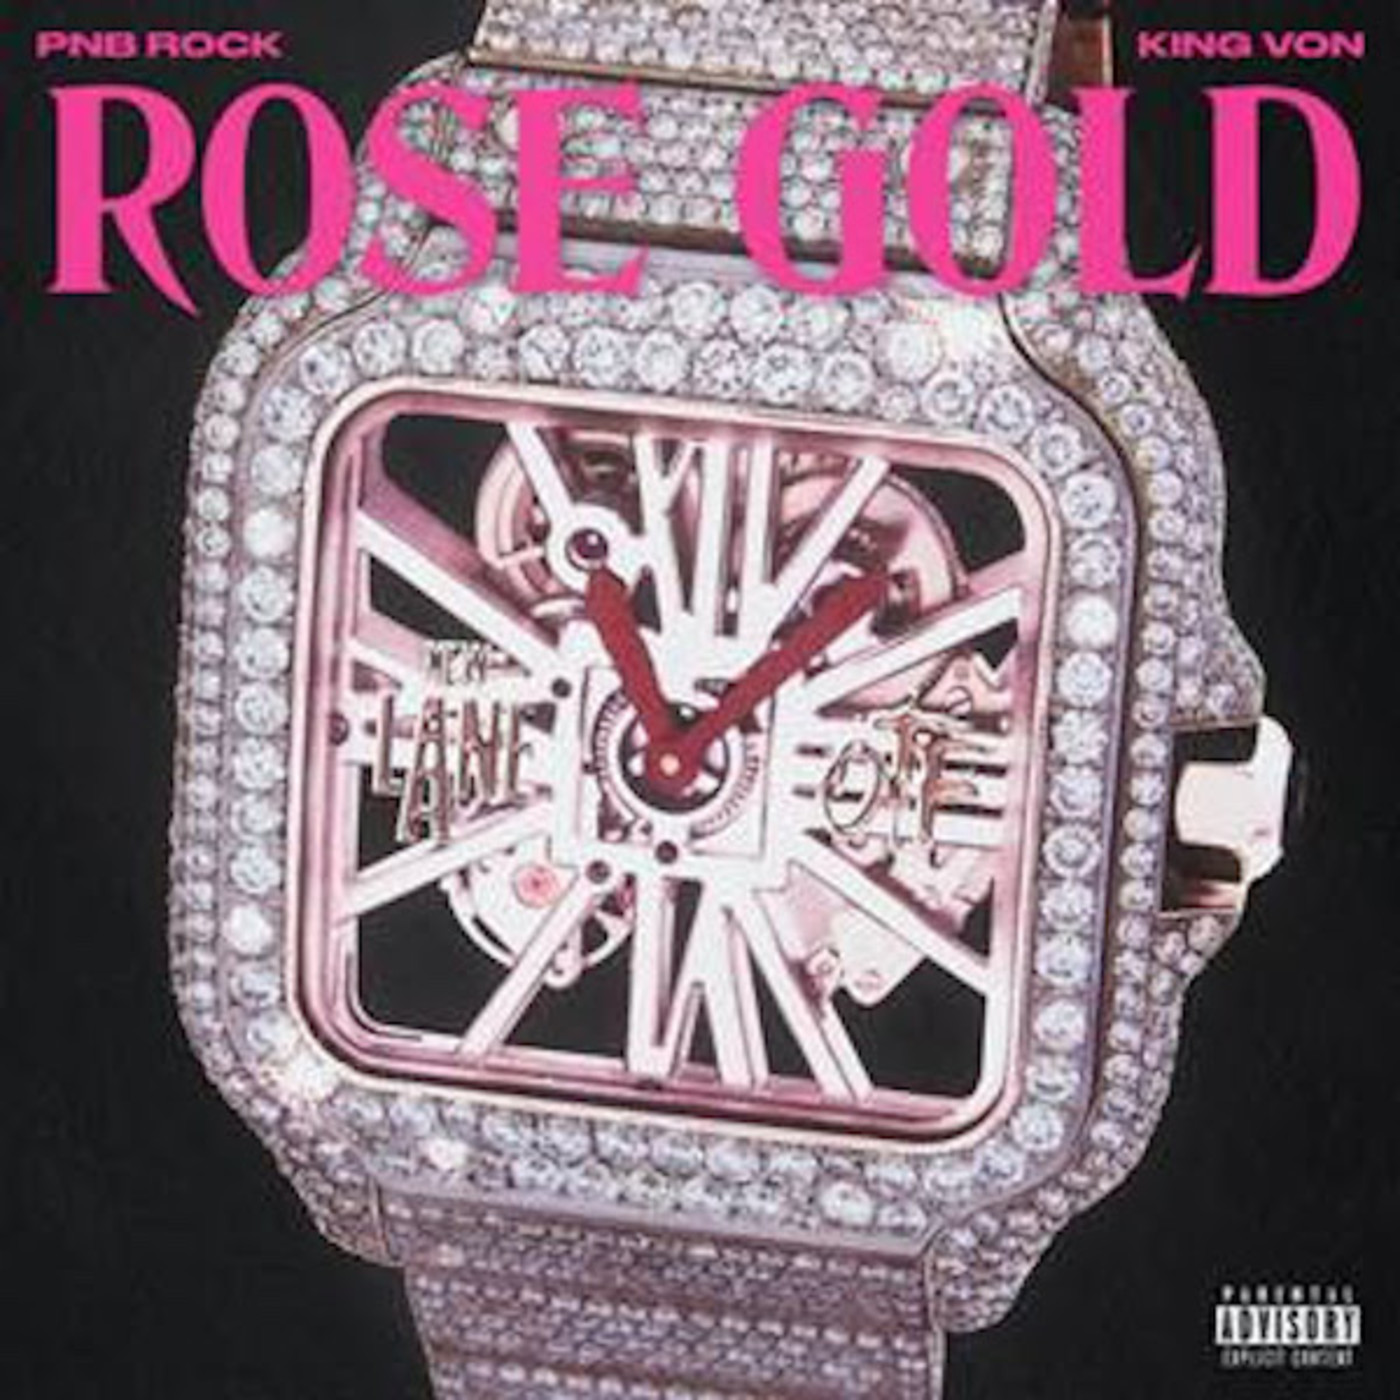 Pnb Rock Shares Video For New Song Rose Gold F King Von Complex - josh a fearless roblox id